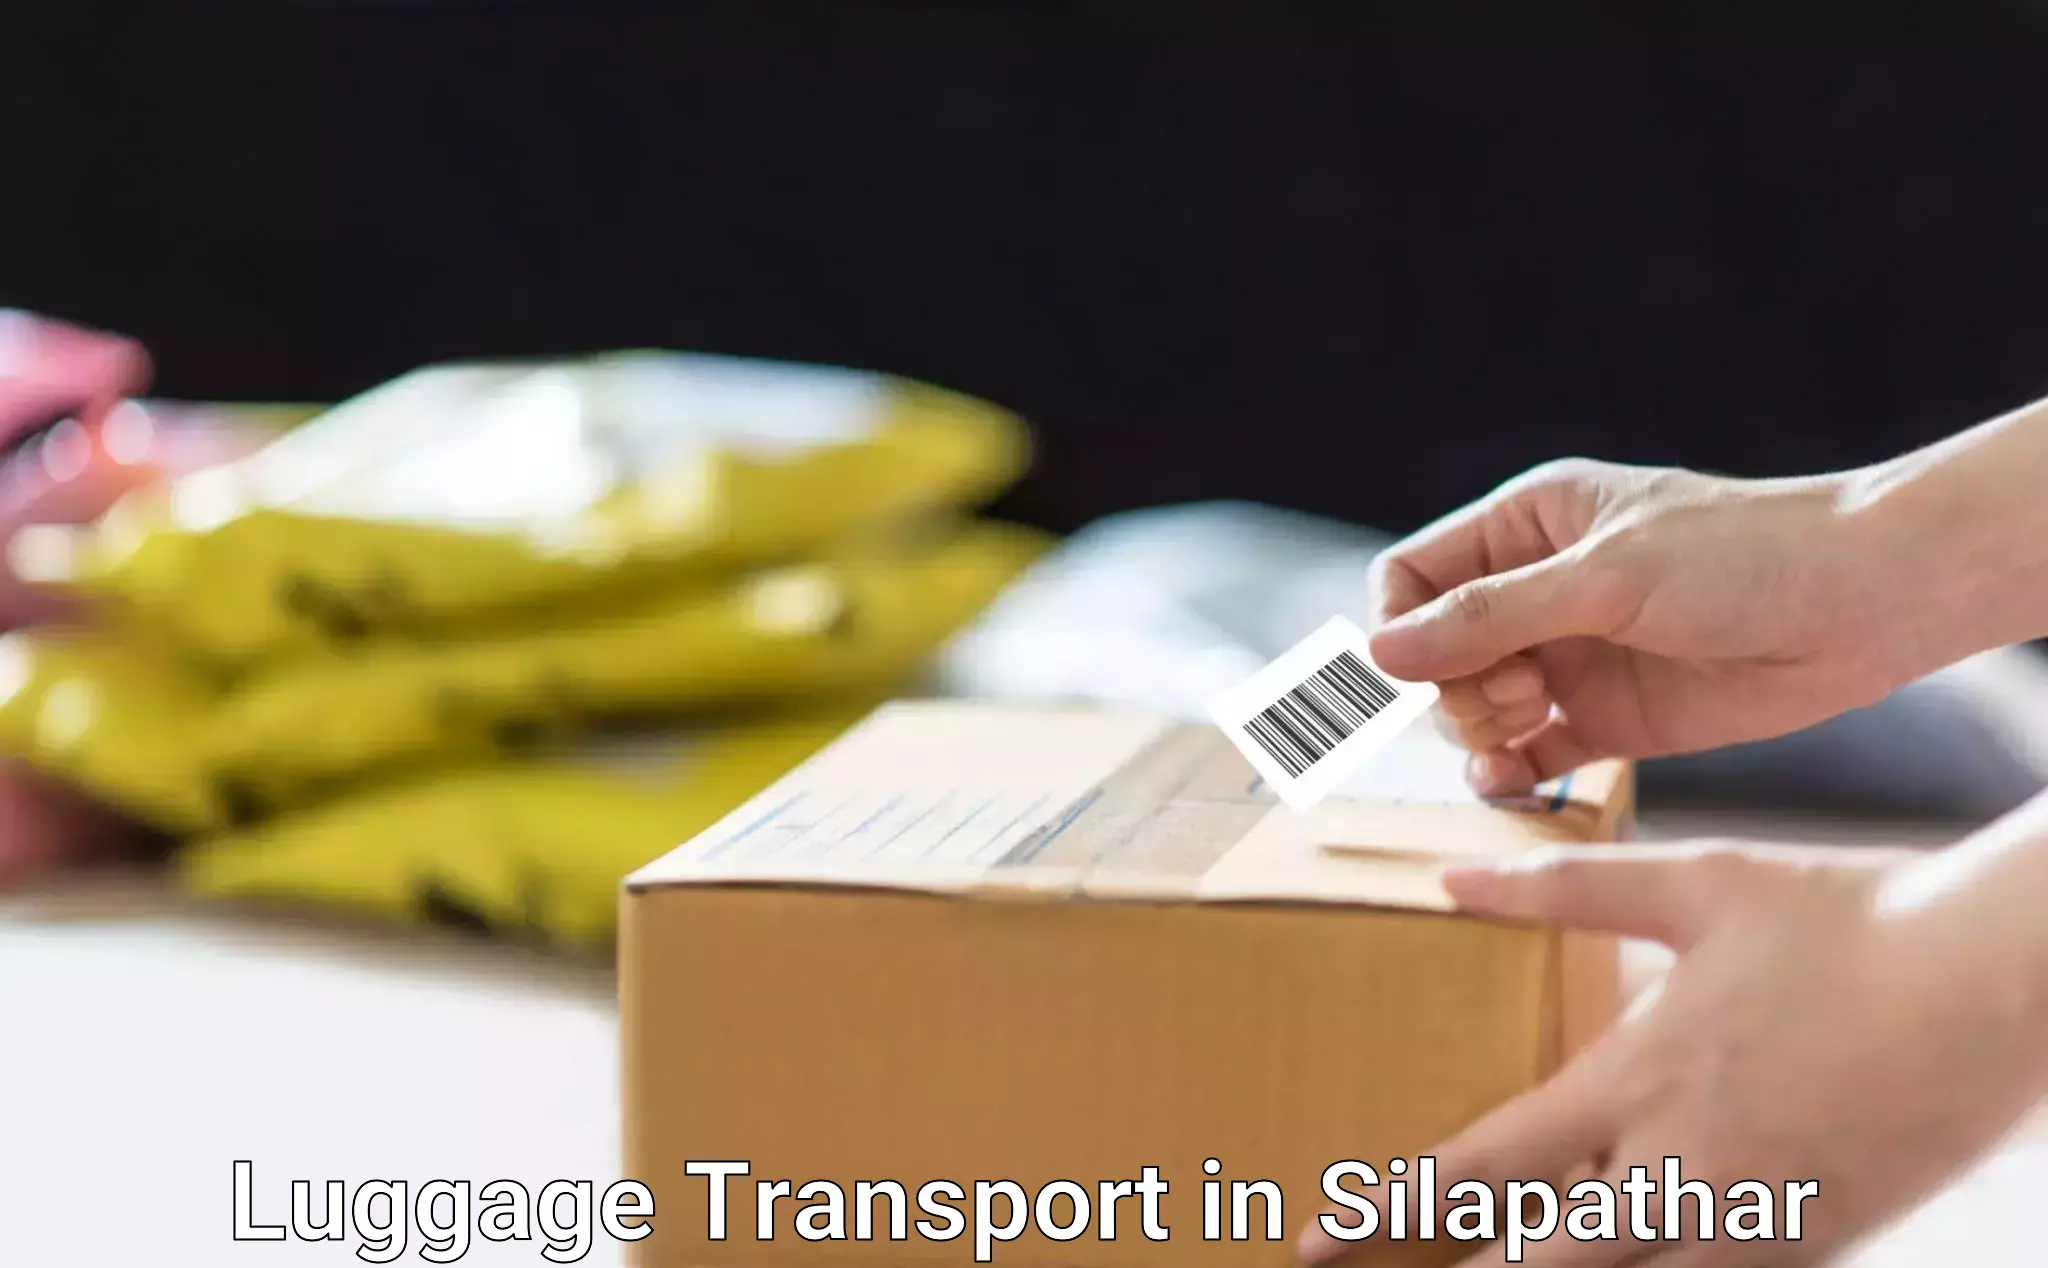 Luggage transport company in Silapathar